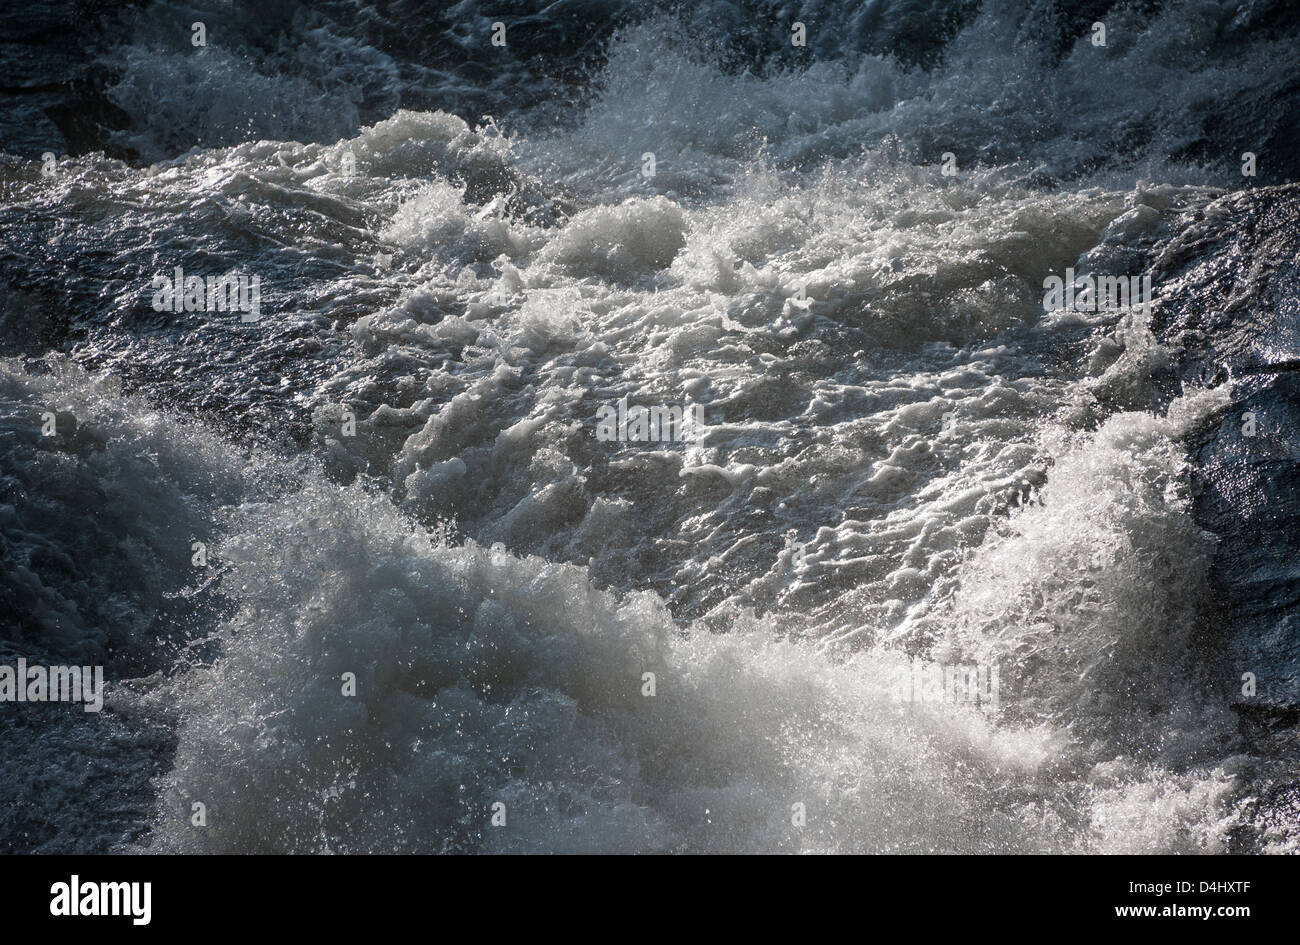 Turbulent, roiling water on the Cullasaja River between Highlands and Franklin, North Carolina, USA. Stock Photo